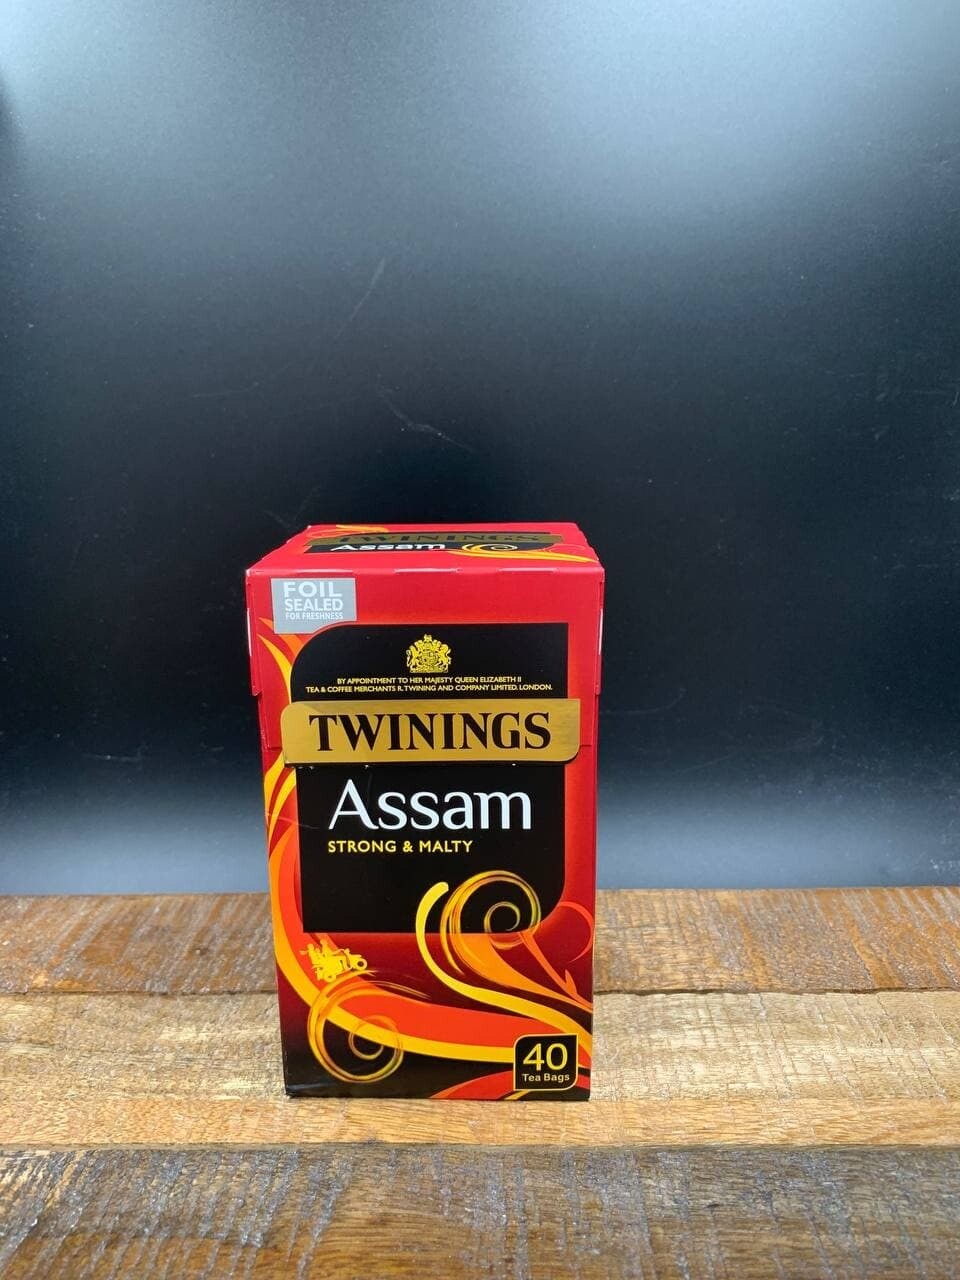 Twinings Assam Strong & Malty 40s